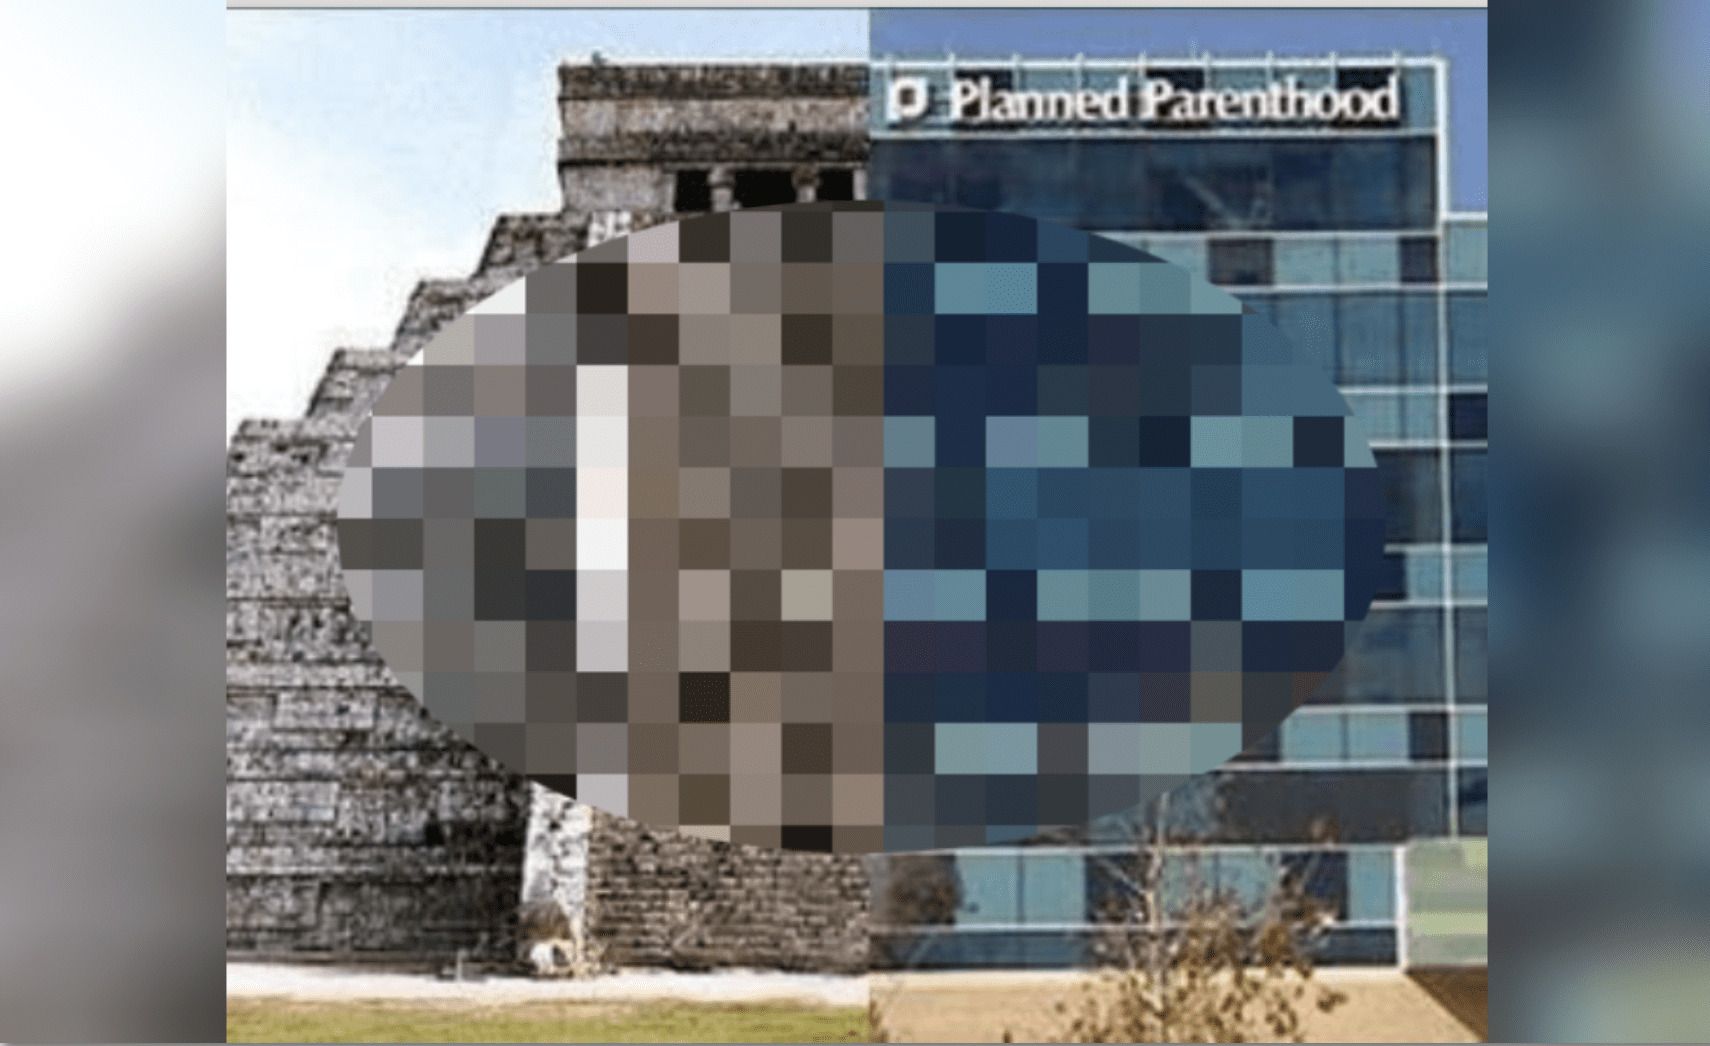 Why Does Planned Parenthood's Headquarters Look EXACTLY Like An Aztec Child-Sacrifice Pyramid? | WLT Report